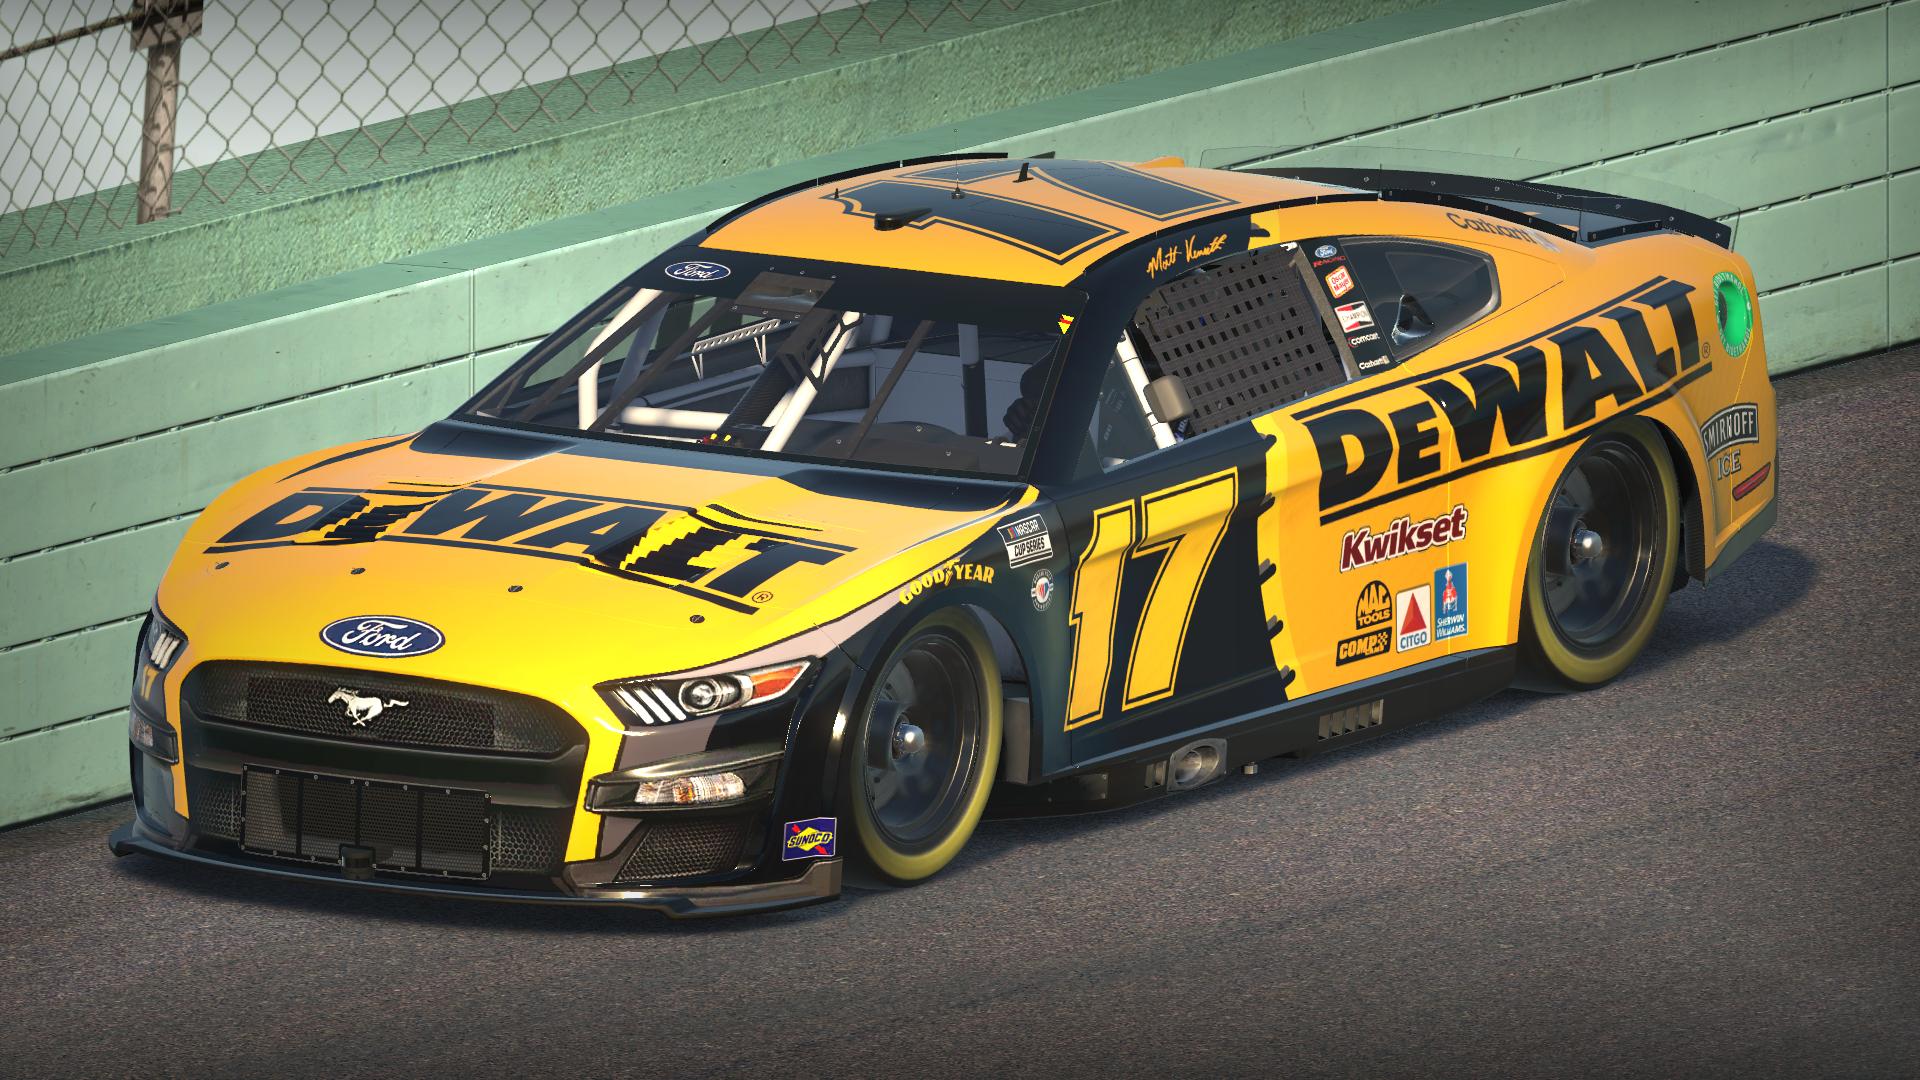 Preview of 2003 Matt Kenseth Dewalt Ford Mustang by Dylan Holland